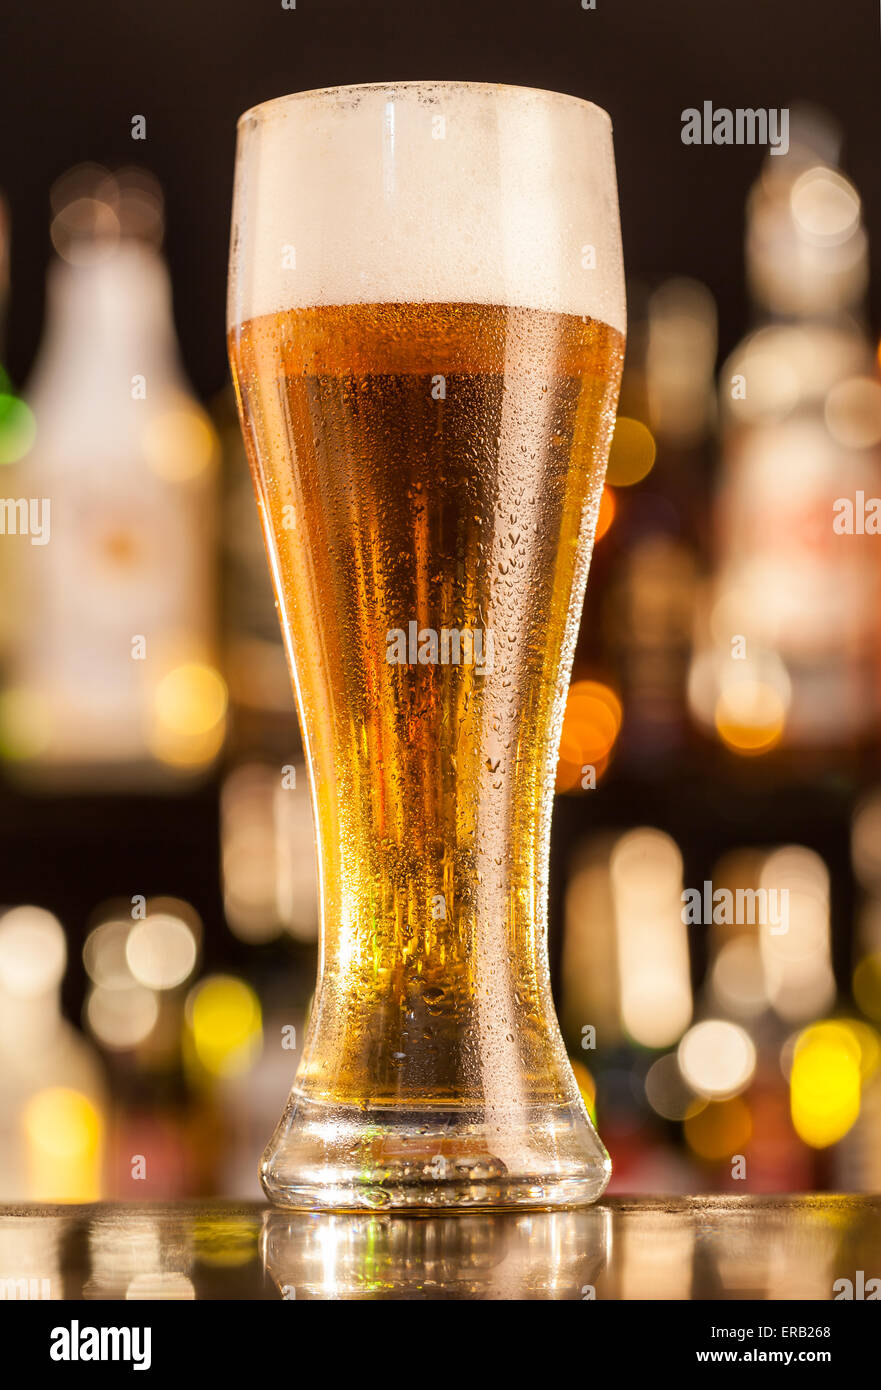 Jug of beer placed on bar counter Stock Photo